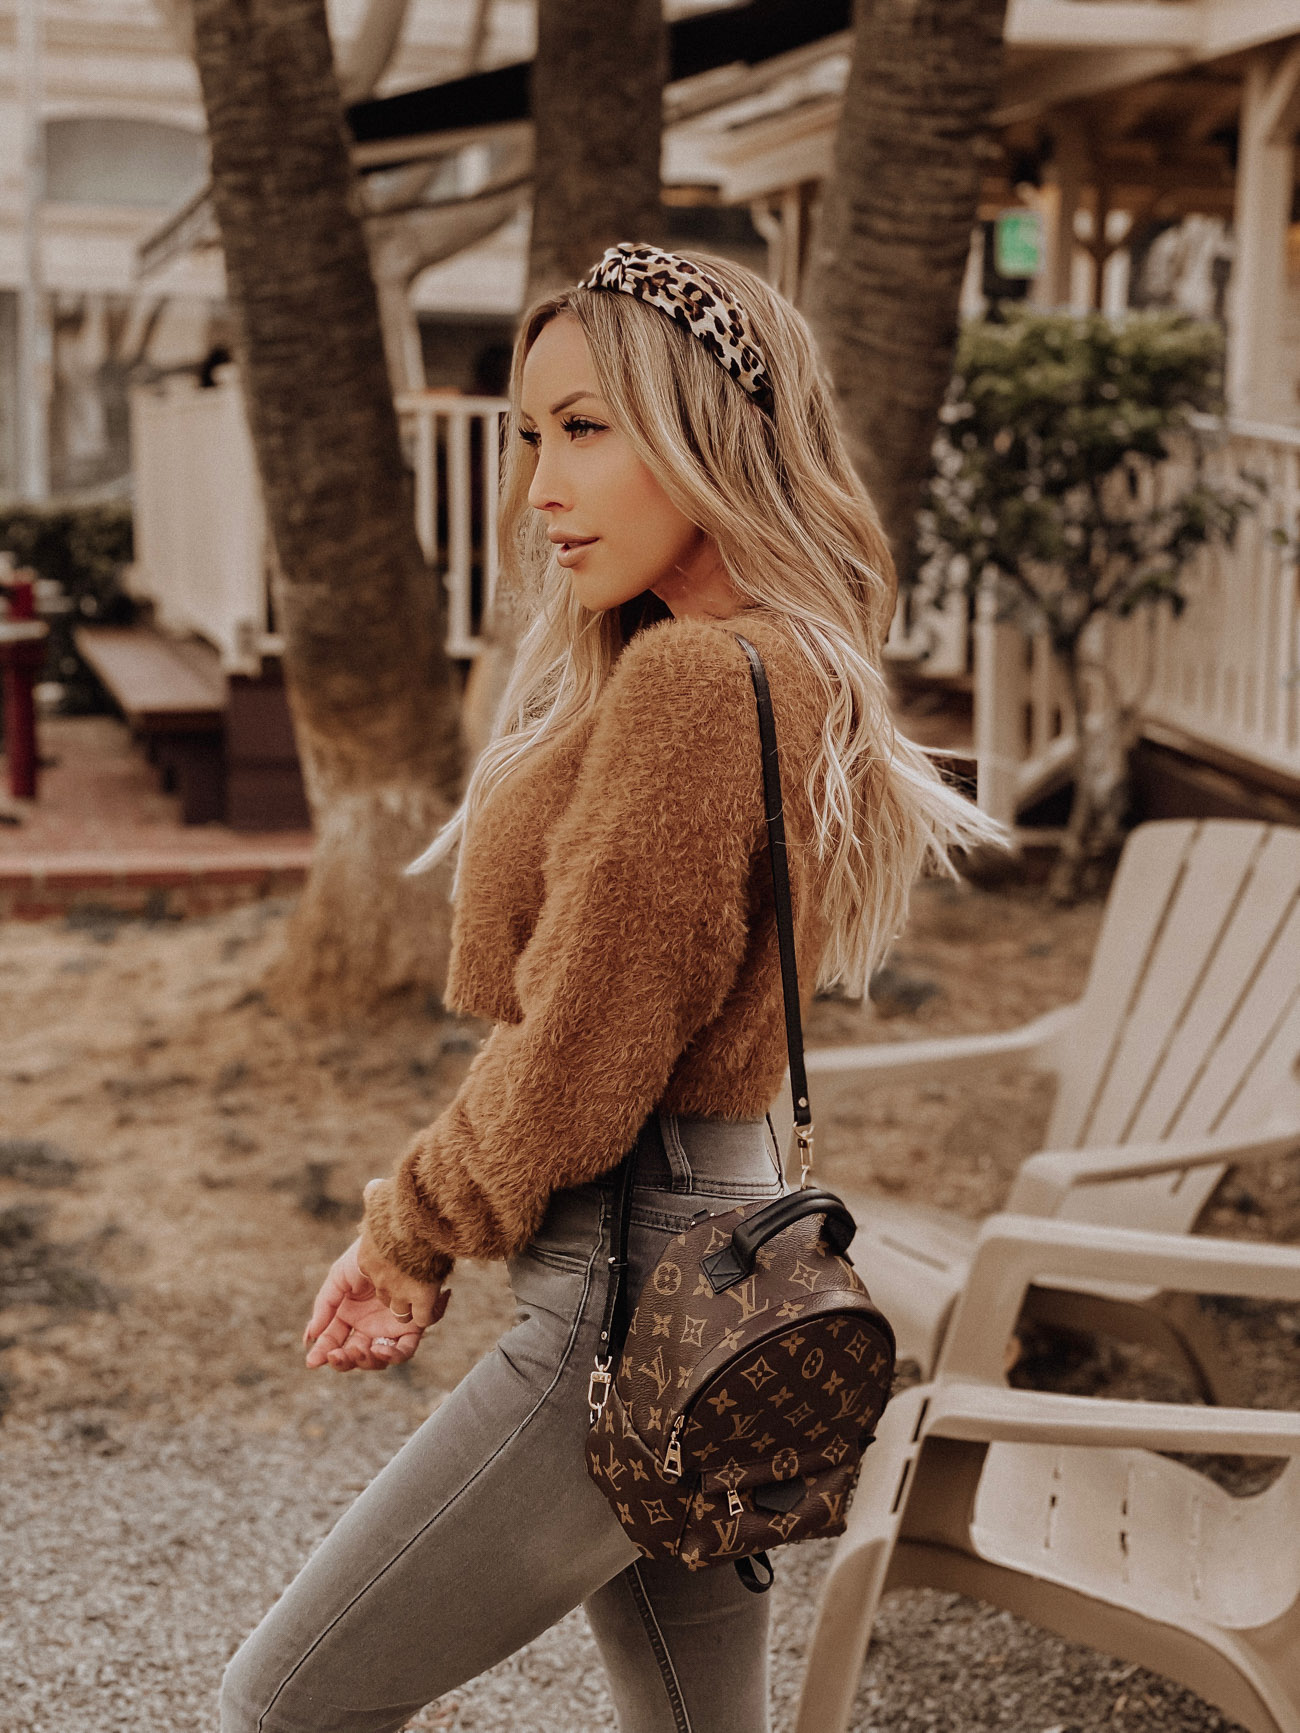 Fall Fashion | Sweater Weather | Louis Vuitton Backpack | Blondie in the City by Hayley Larue